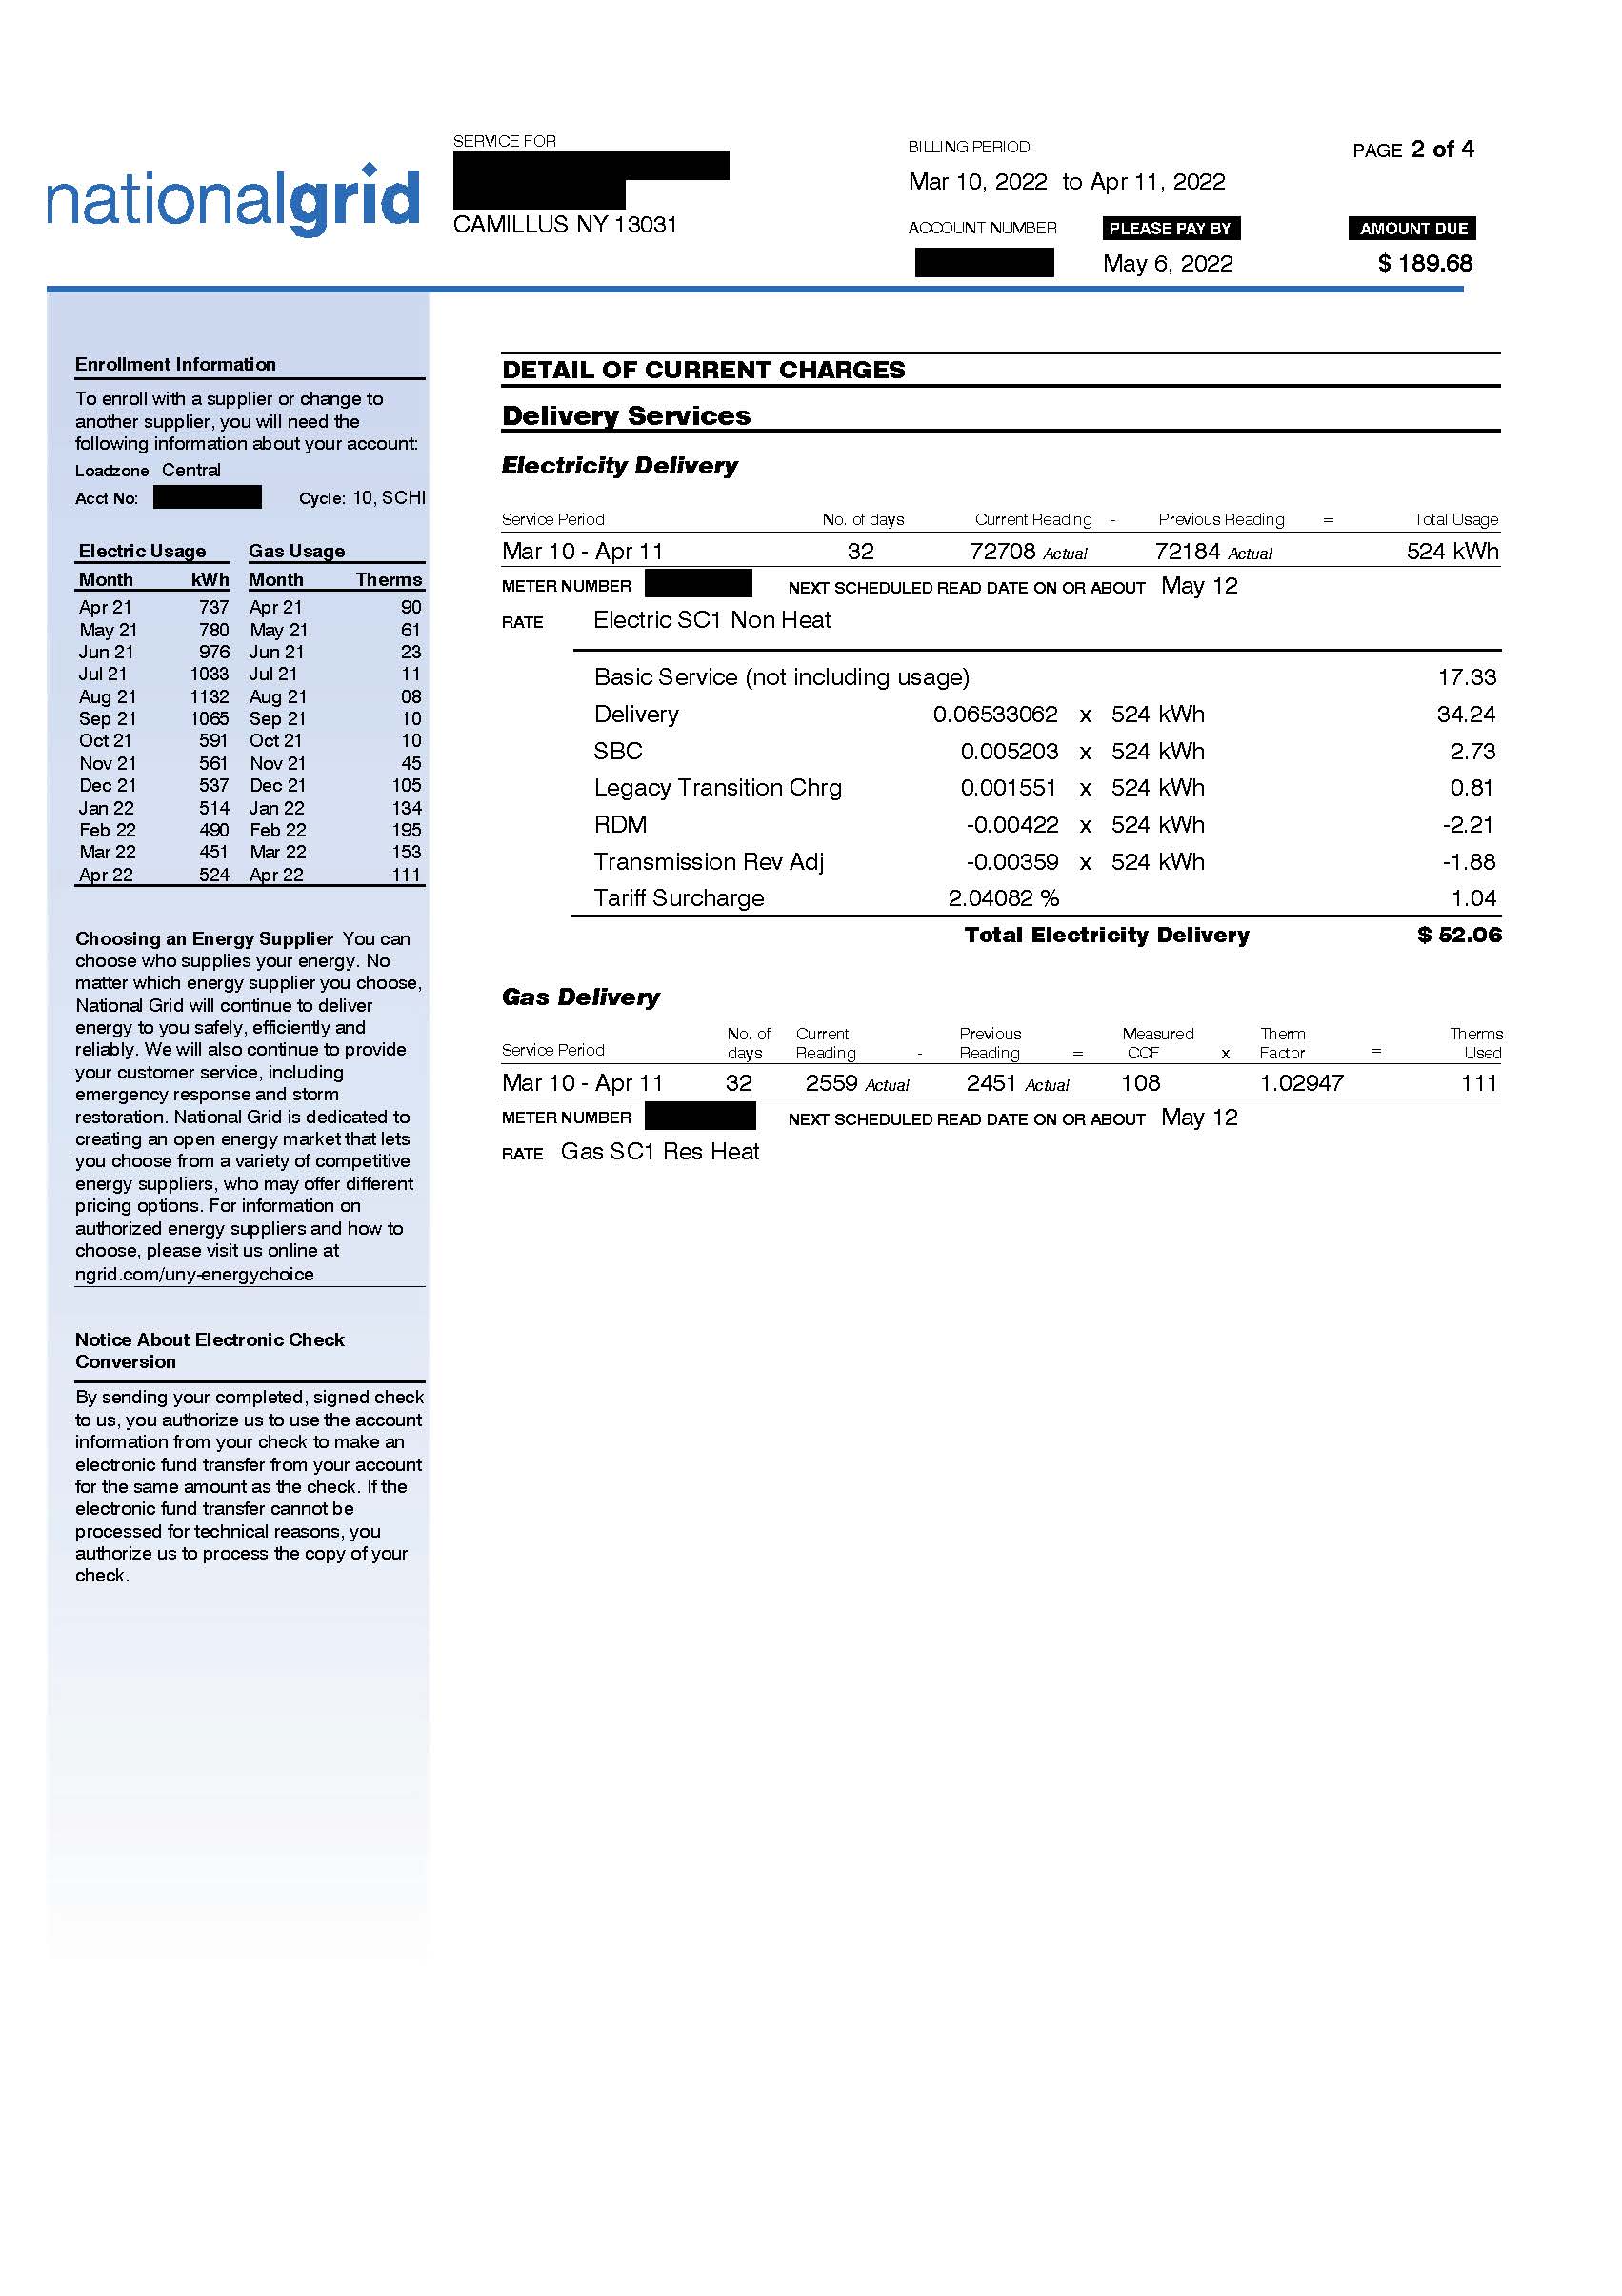 Basic Electric Bill - Page 2